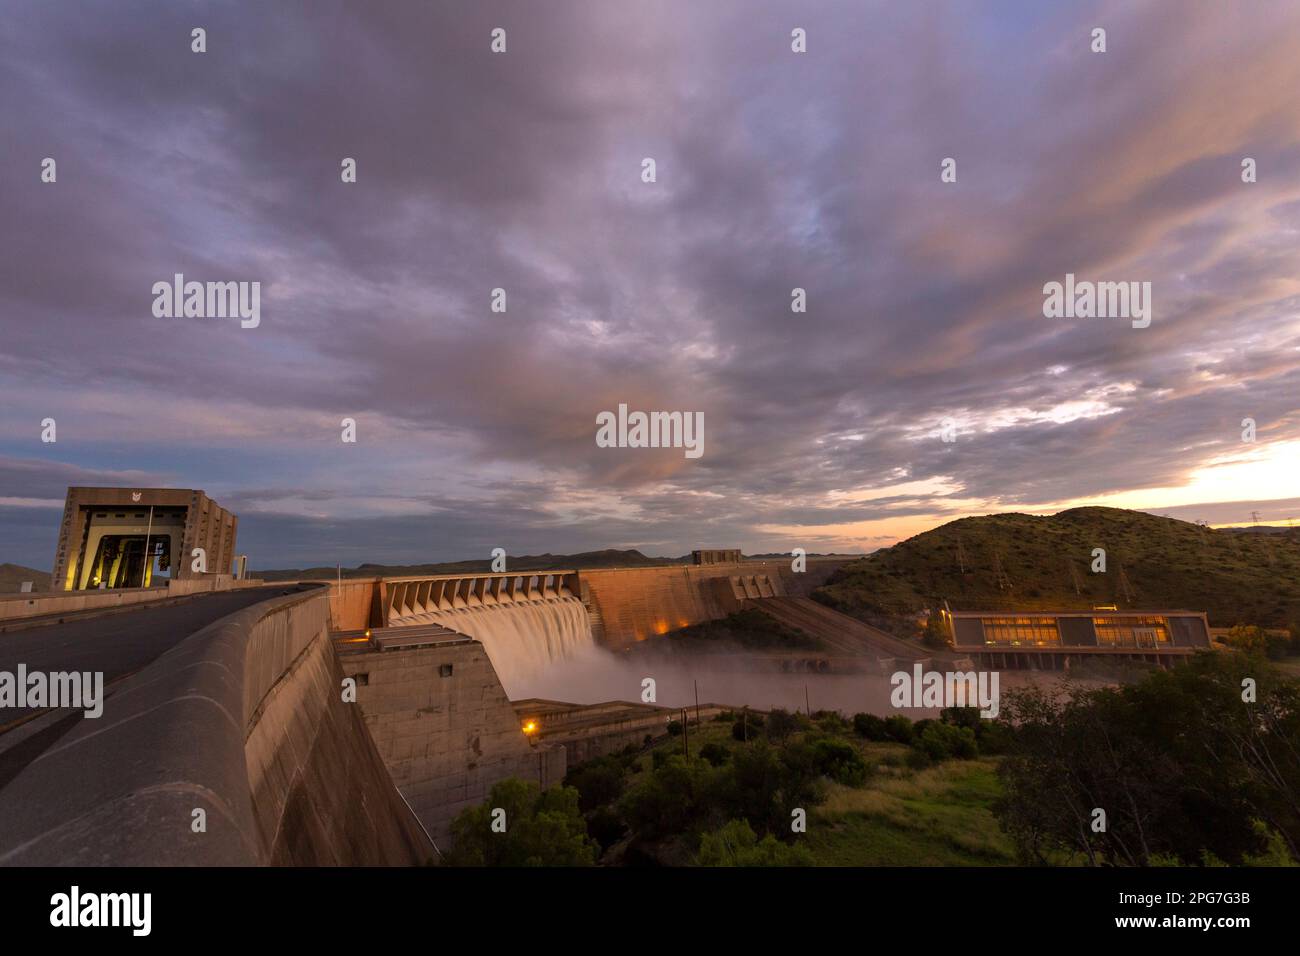 Stock photo of the Gariep Dam wall at dusk with water overflowing and the hydro-electric installation below the dam wall Stock Photo